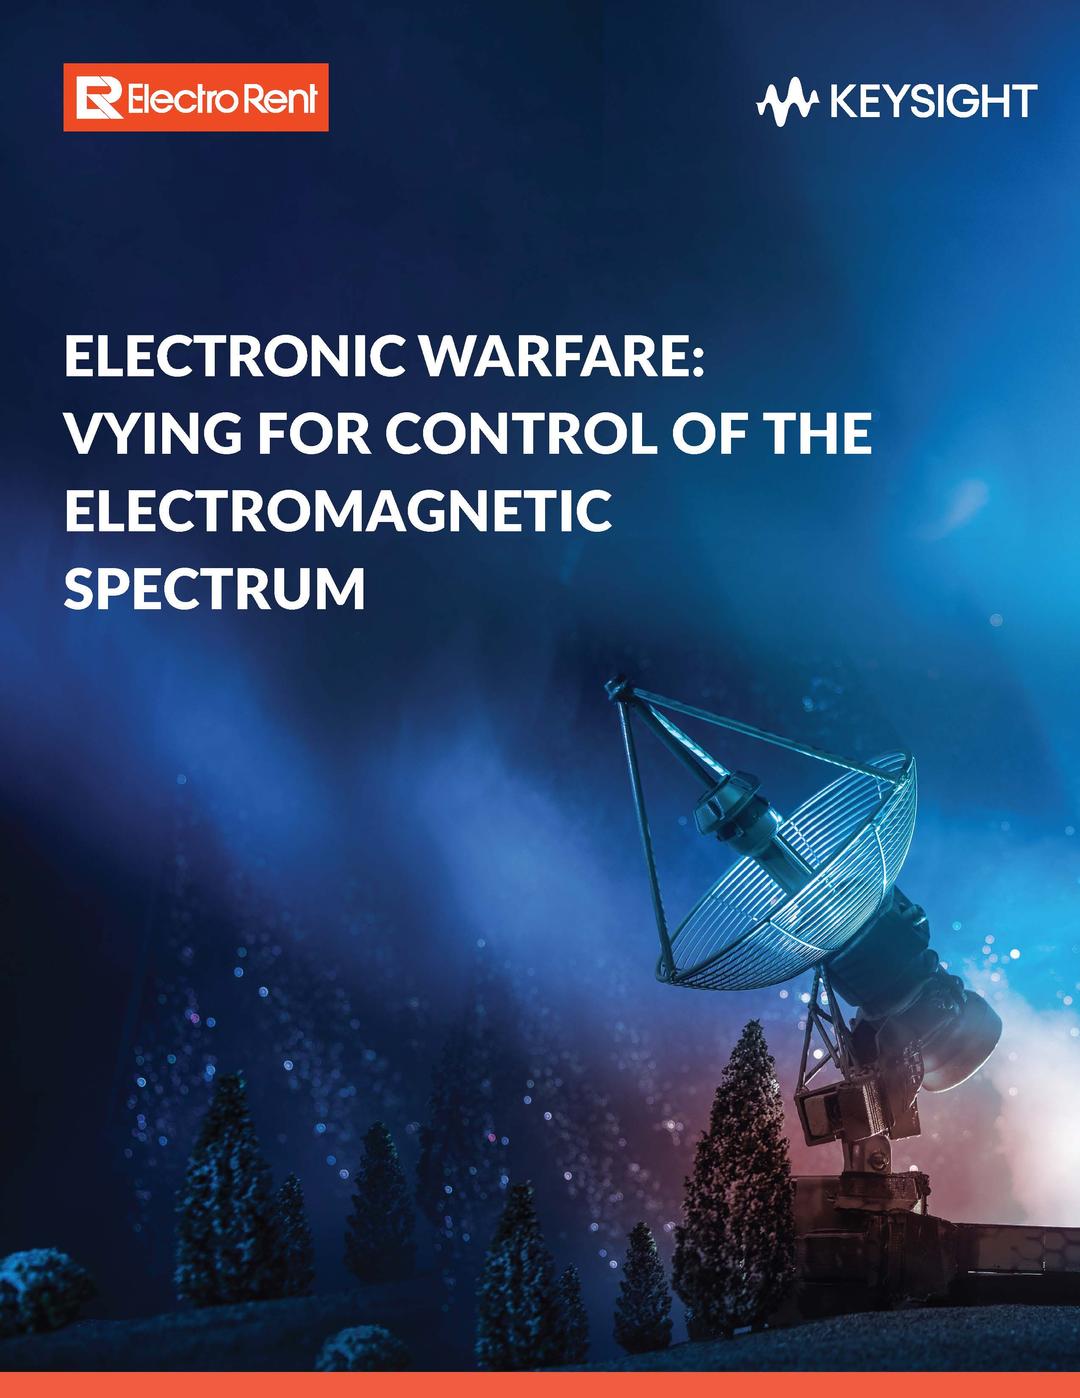 Keysight: Vying for Control of the Electromagnetic Spectrum, image